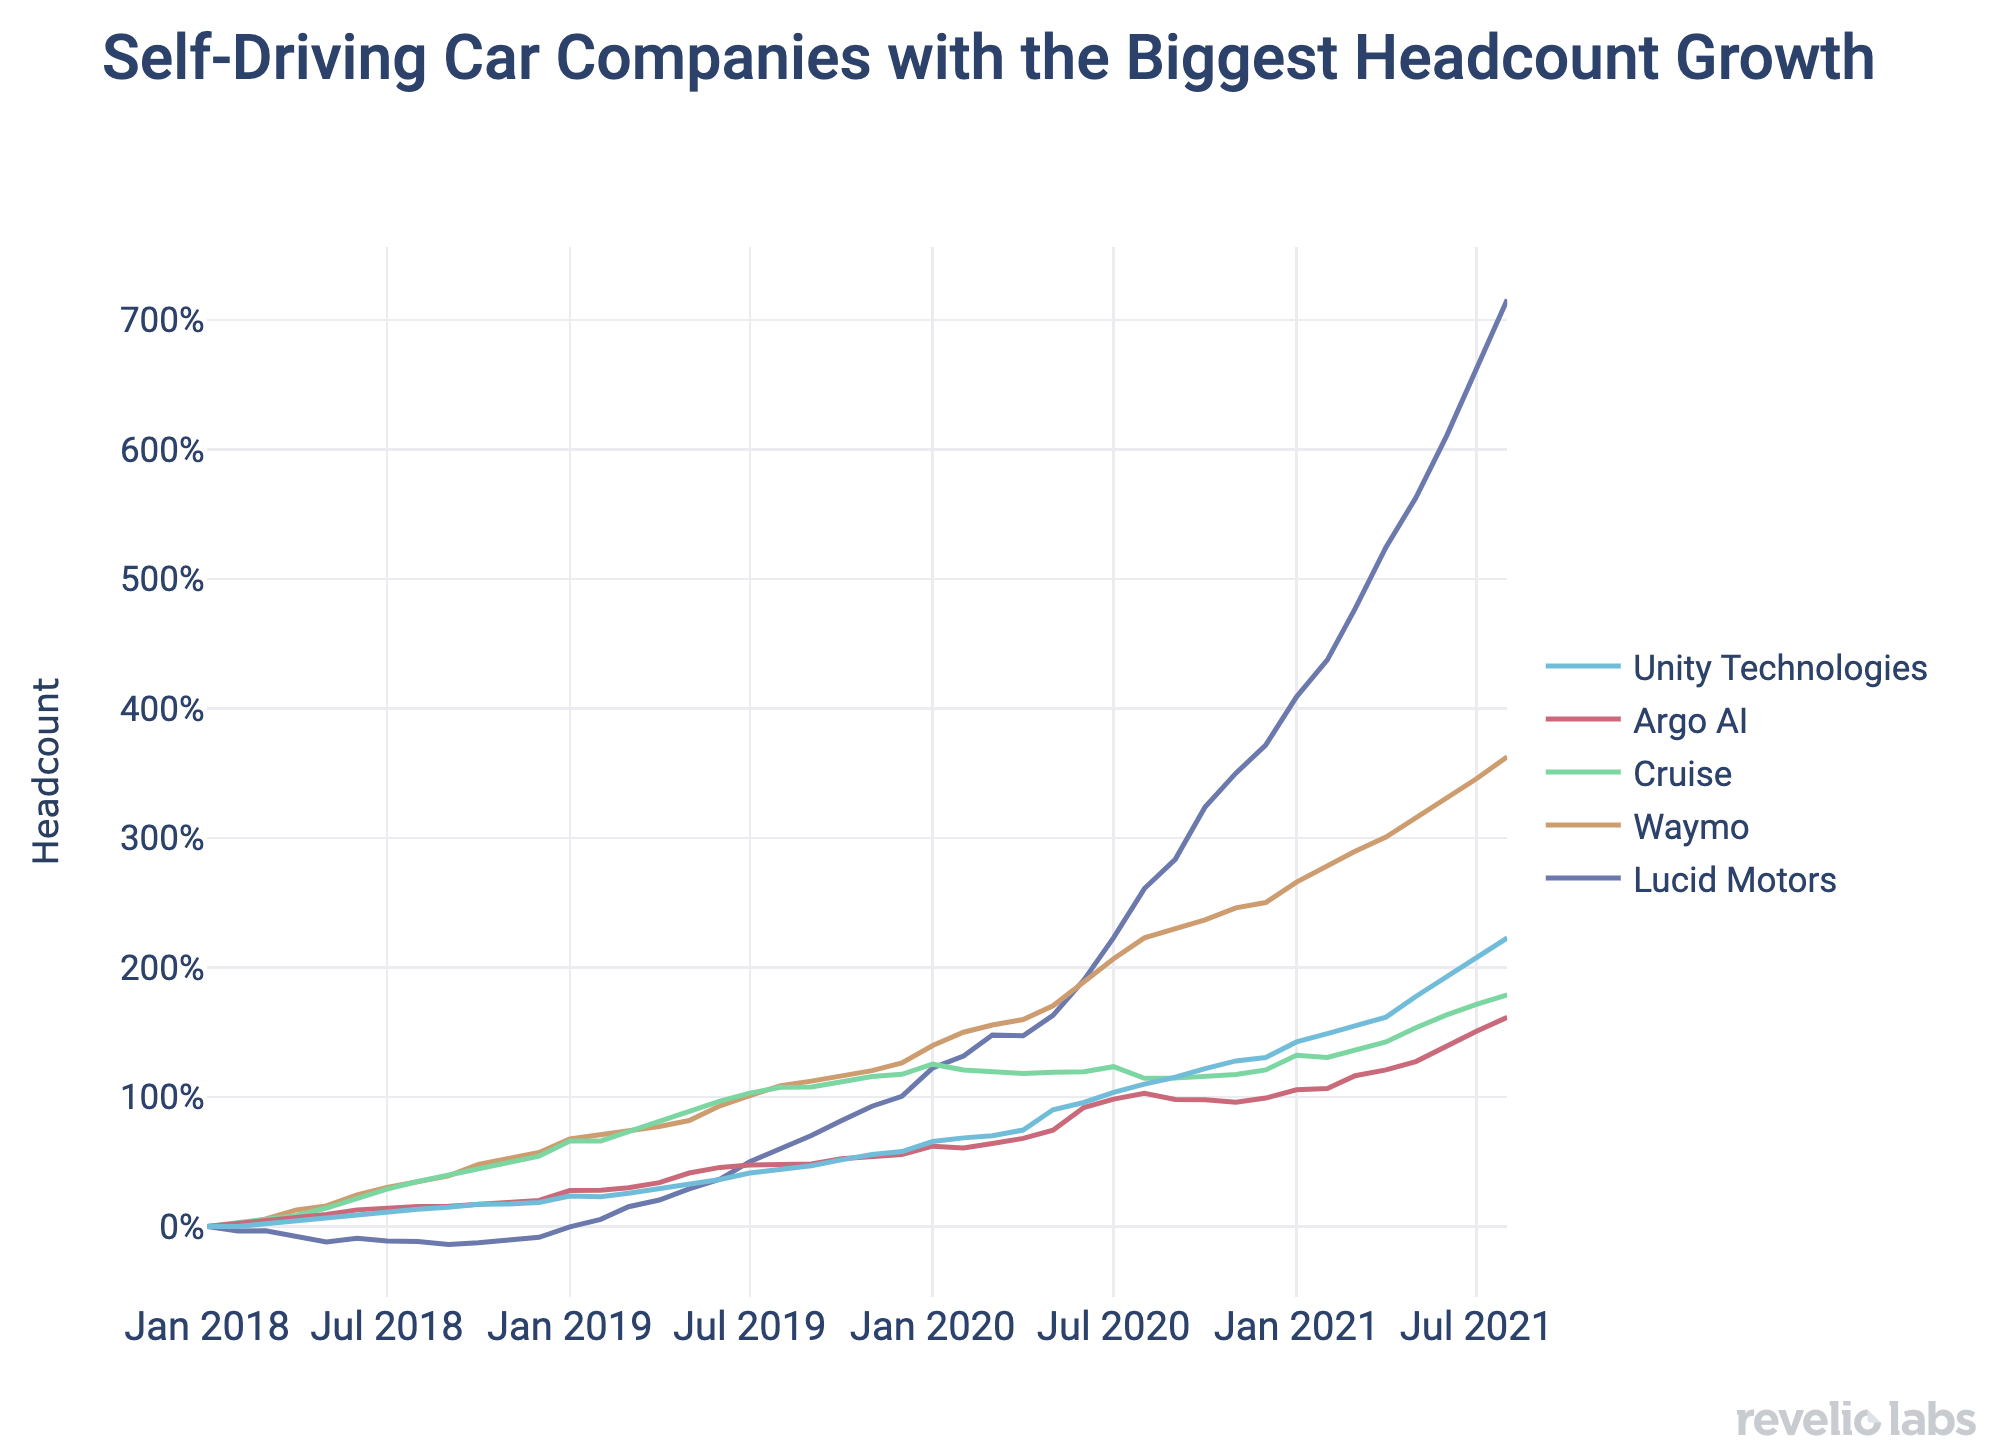 Self-Driving Car Companies with the Biggest Headcount Growth